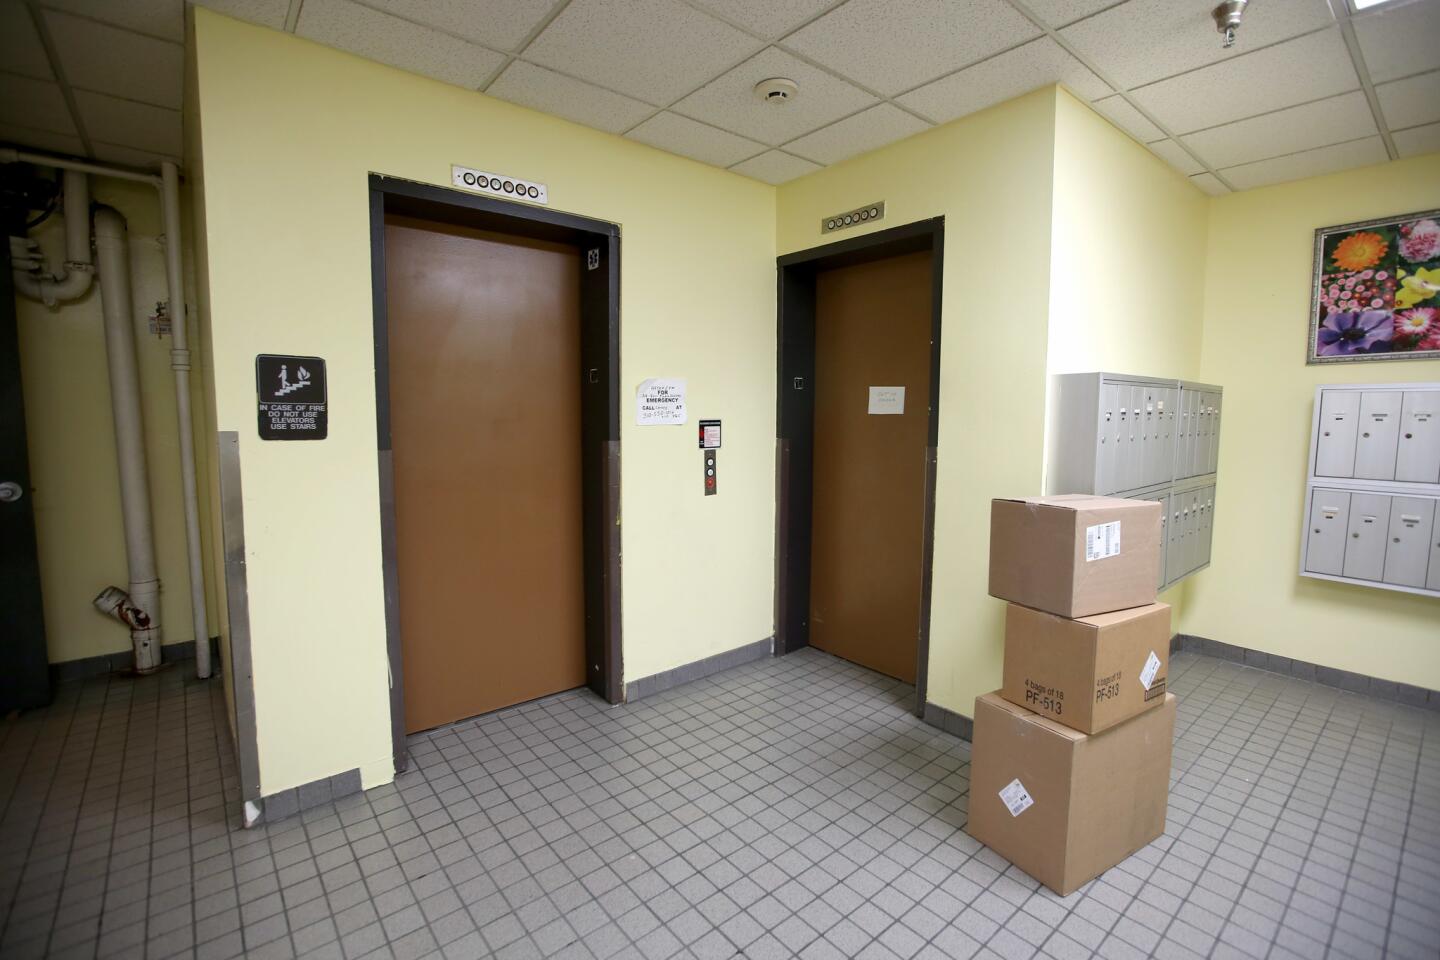 Both elevators are not working at the Honolulu Manor Senior Apartments, in Montrose on Friday, May 31, 2019. One has been out for 8 months and the second one for 10 days as of the 31st of May. Residents have to walk one or two flights of stairs to get to their apartments.